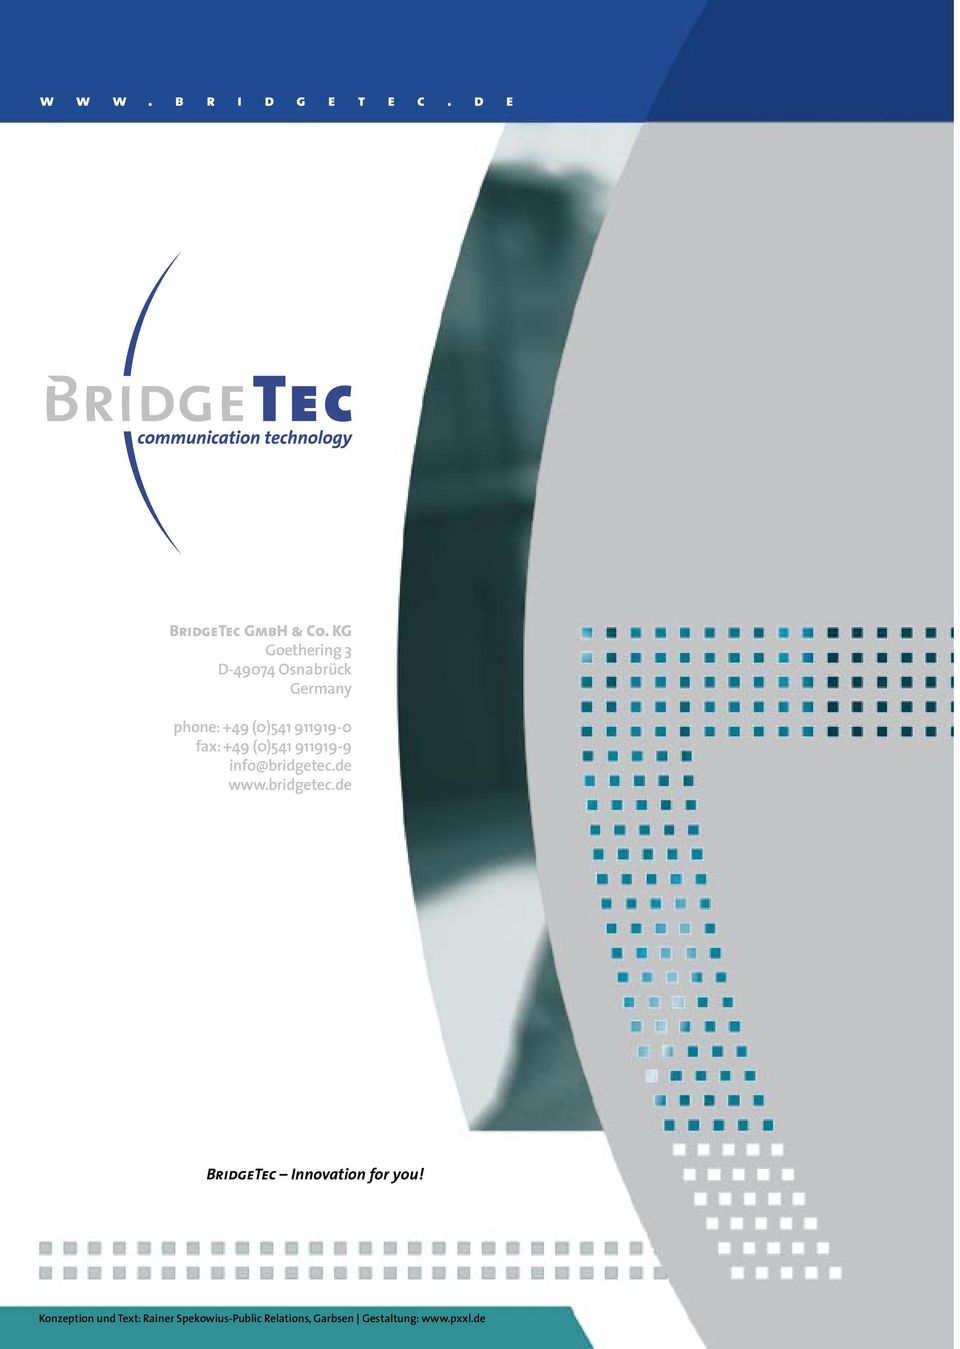 +49 (0)541 911919-9 info@bridgetec.de www.bridgetec.de BridgeTec Innovation for you!